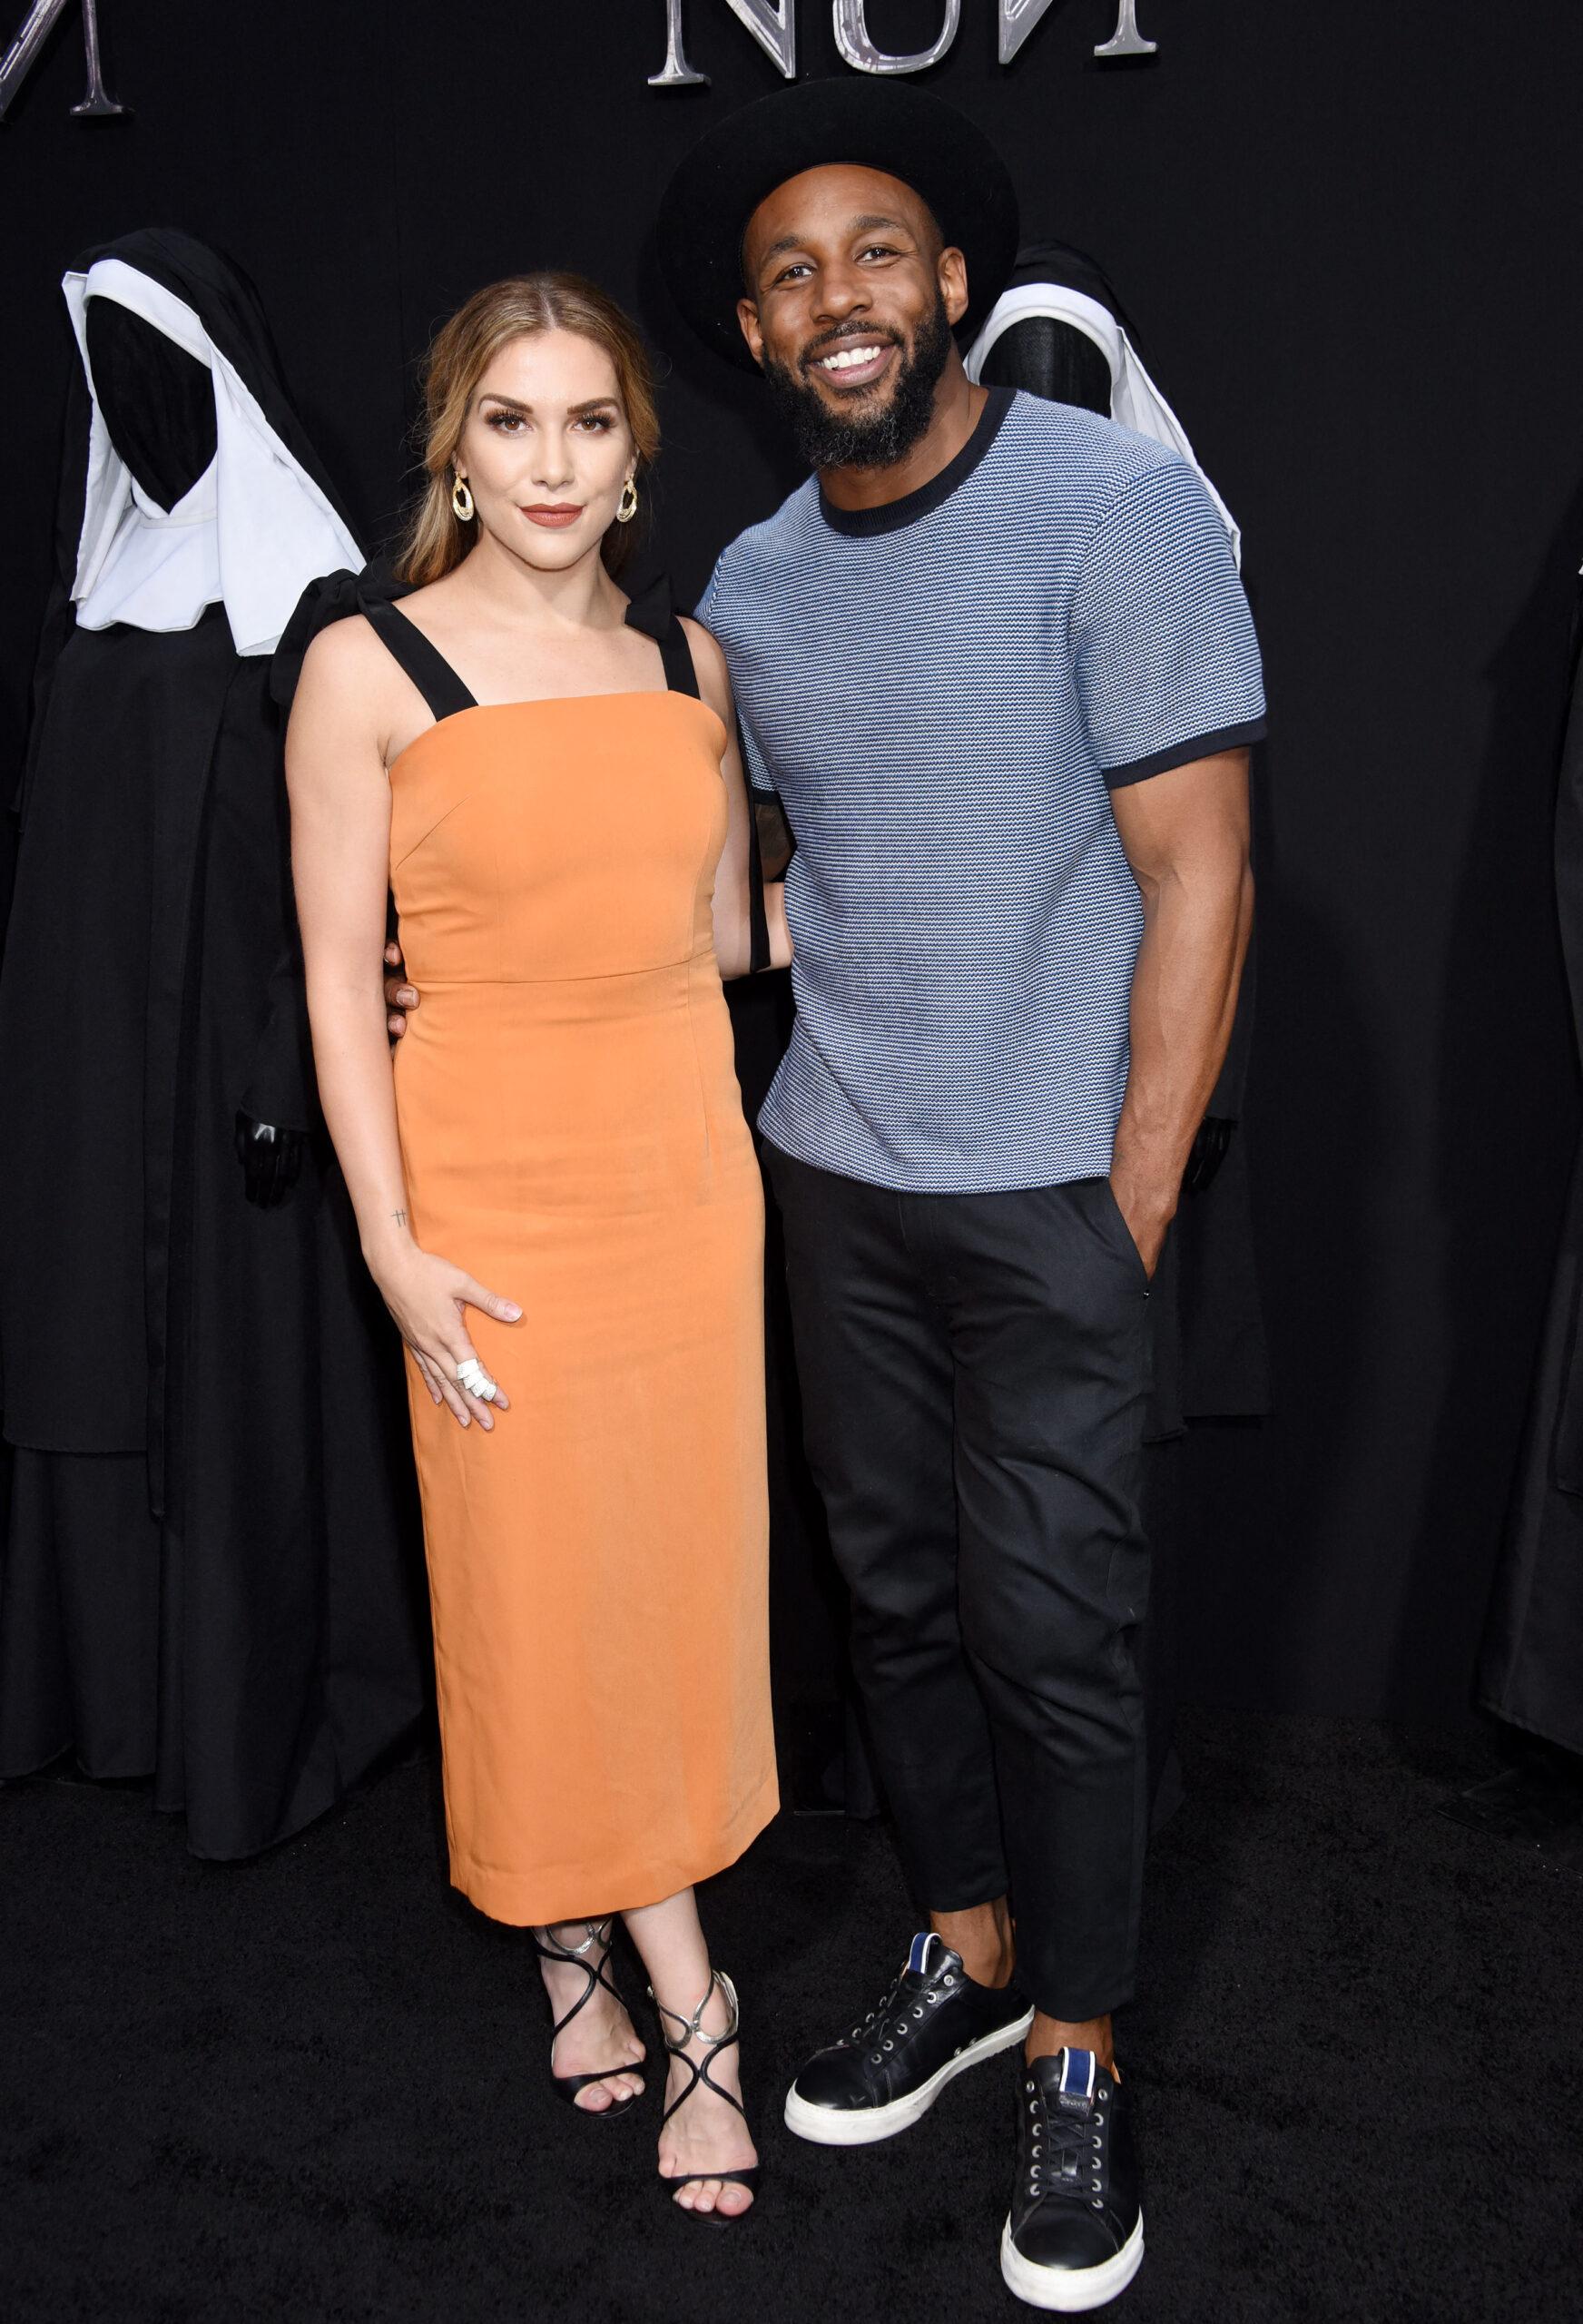 Allison Holker and Stephen Boss, tWitch at the 'The Nun' World Premiere held at the TCL Chinese Theatre on September 4, 2018